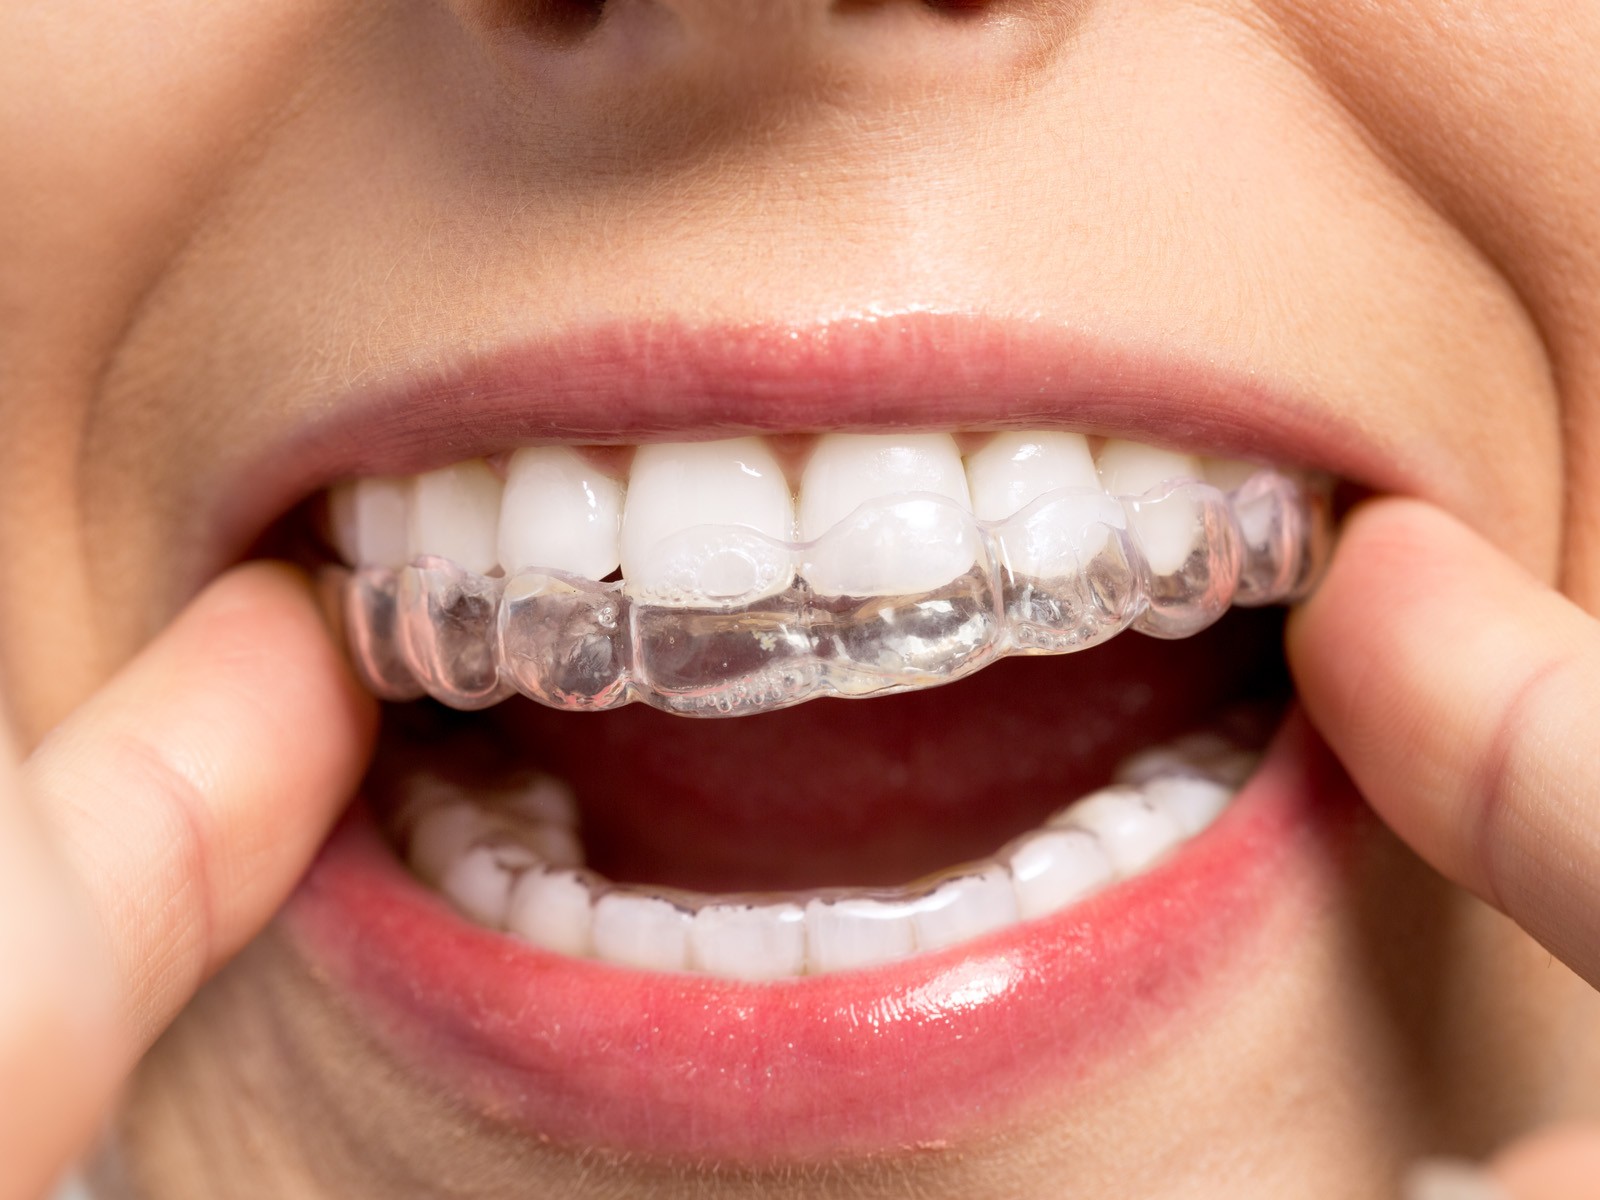 How can I remove Invisalign without pain?